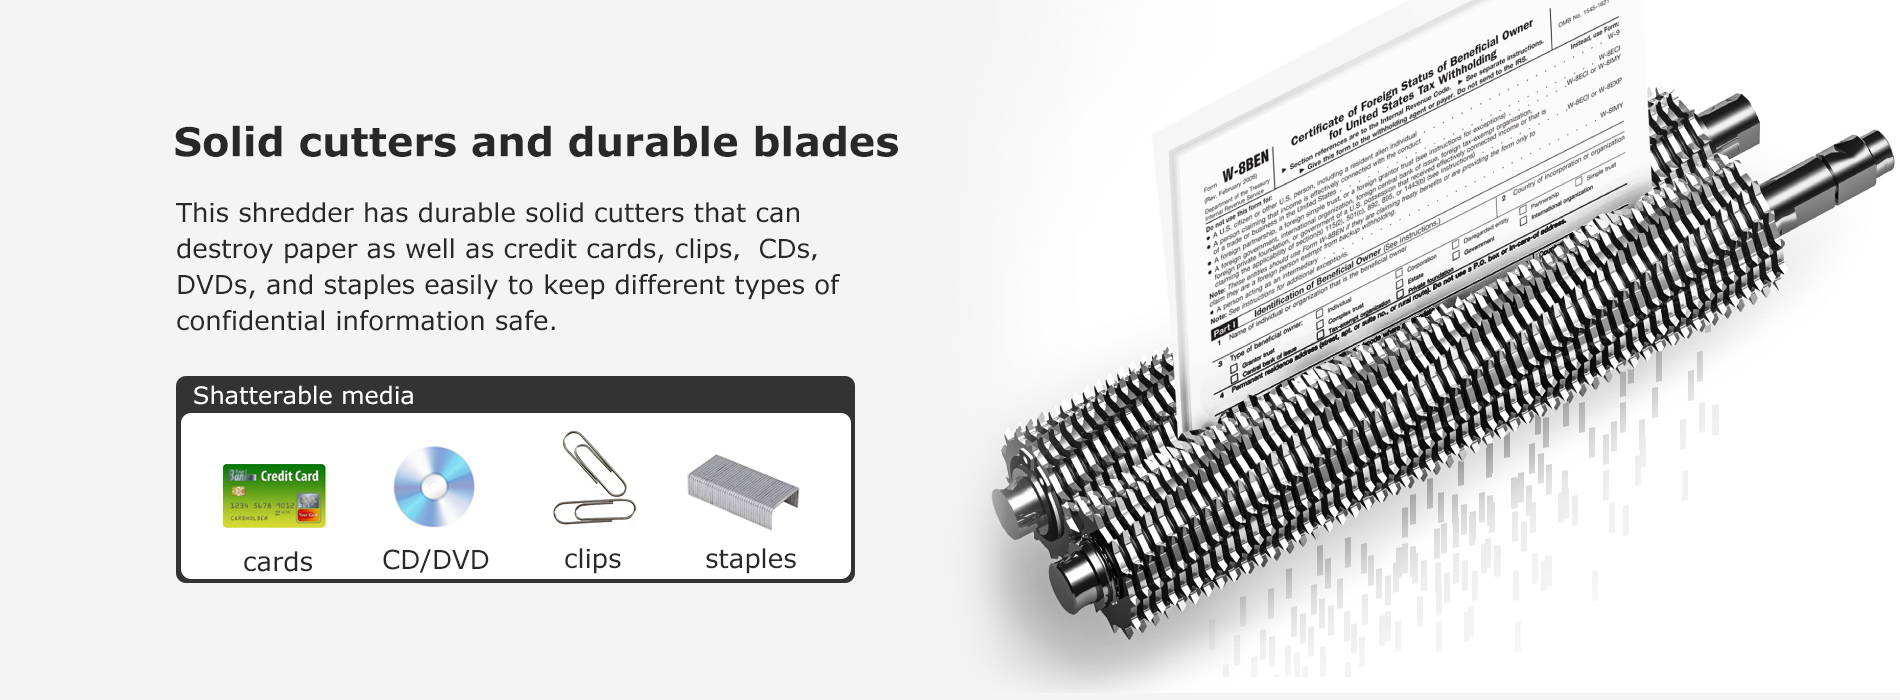 Solid cutters and durable blades  This shredder has durable solid cutters that can destroy paper as well as credit cards, clips，CDs，DVDs, and staples easily to keep different types of confidential information safe.